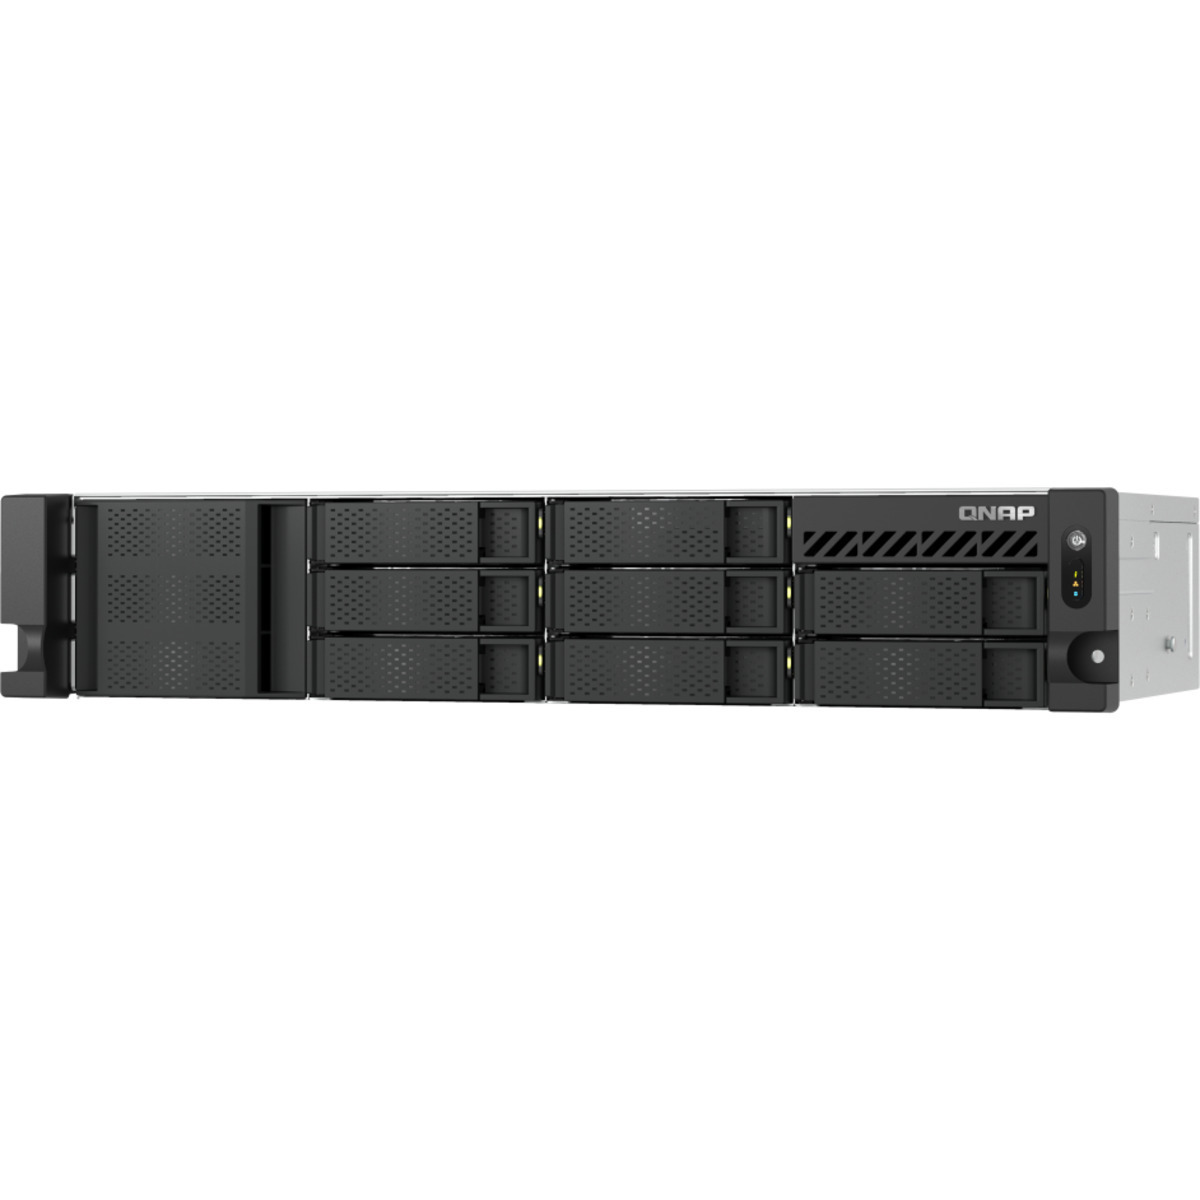 QNAP TS-855eU 110tb 8-Bay RackMount Multimedia / Power User / Business NAS - Network Attached Storage Device 5x22tb Seagate IronWolf Pro ST22000NT001 3.5 7200rpm SATA 6Gb/s HDD NAS Class Drives Installed - Burn-In Tested - FREE RAM UPGRADE TS-855eU